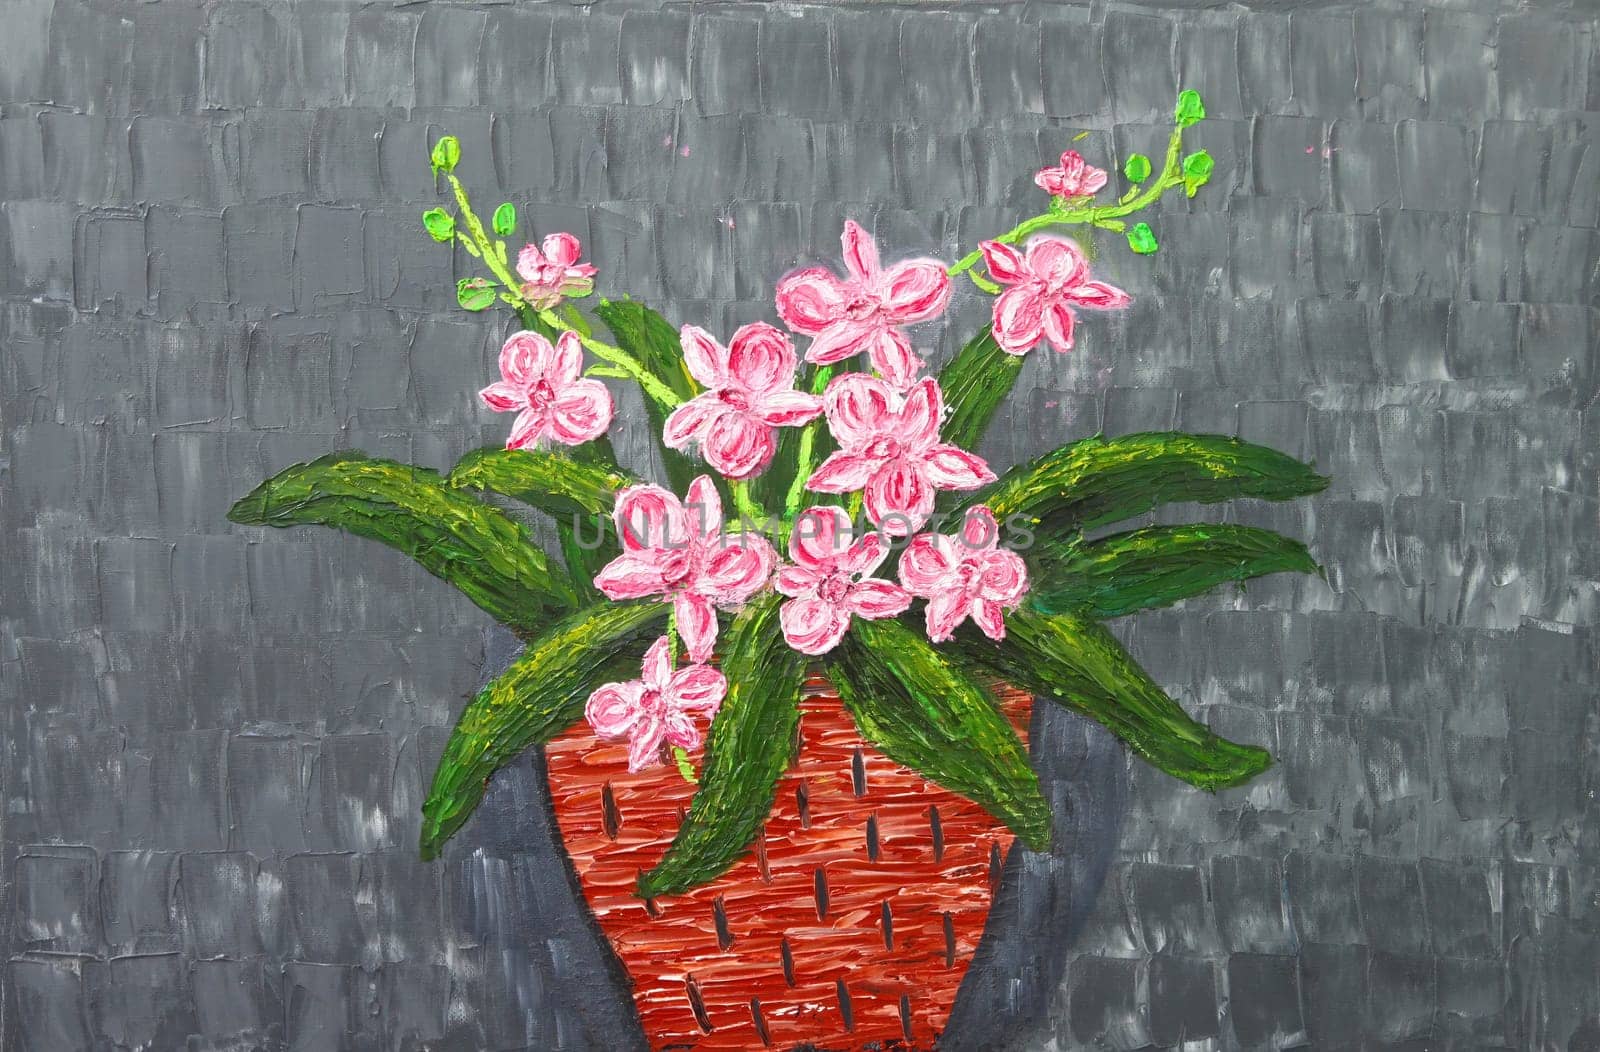 Oil painting of Red and white orchids growing in red clay pot